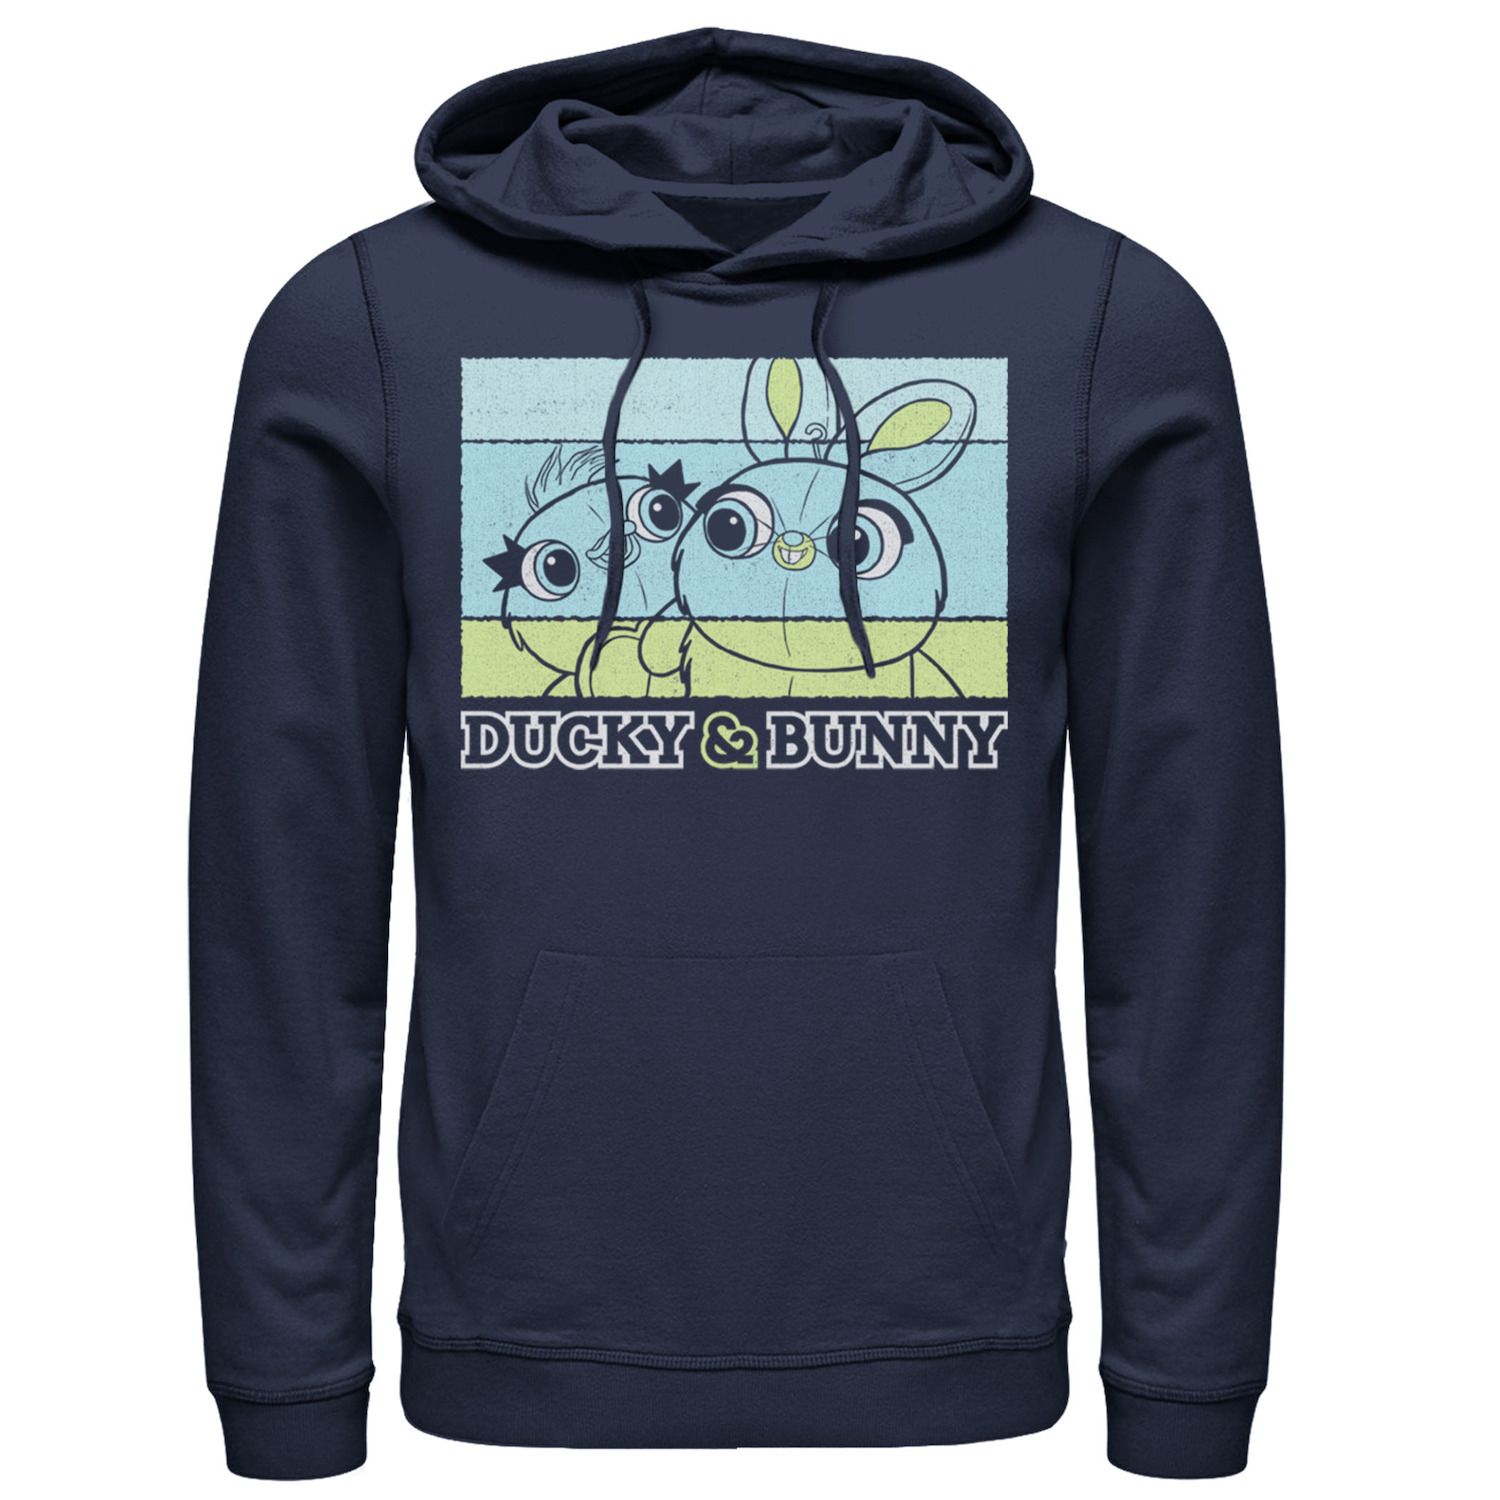 Image for Disney / Pixar Men's Toy Story 4 Duck & Bunny Retro Style Poster Hoodie at Kohl's.